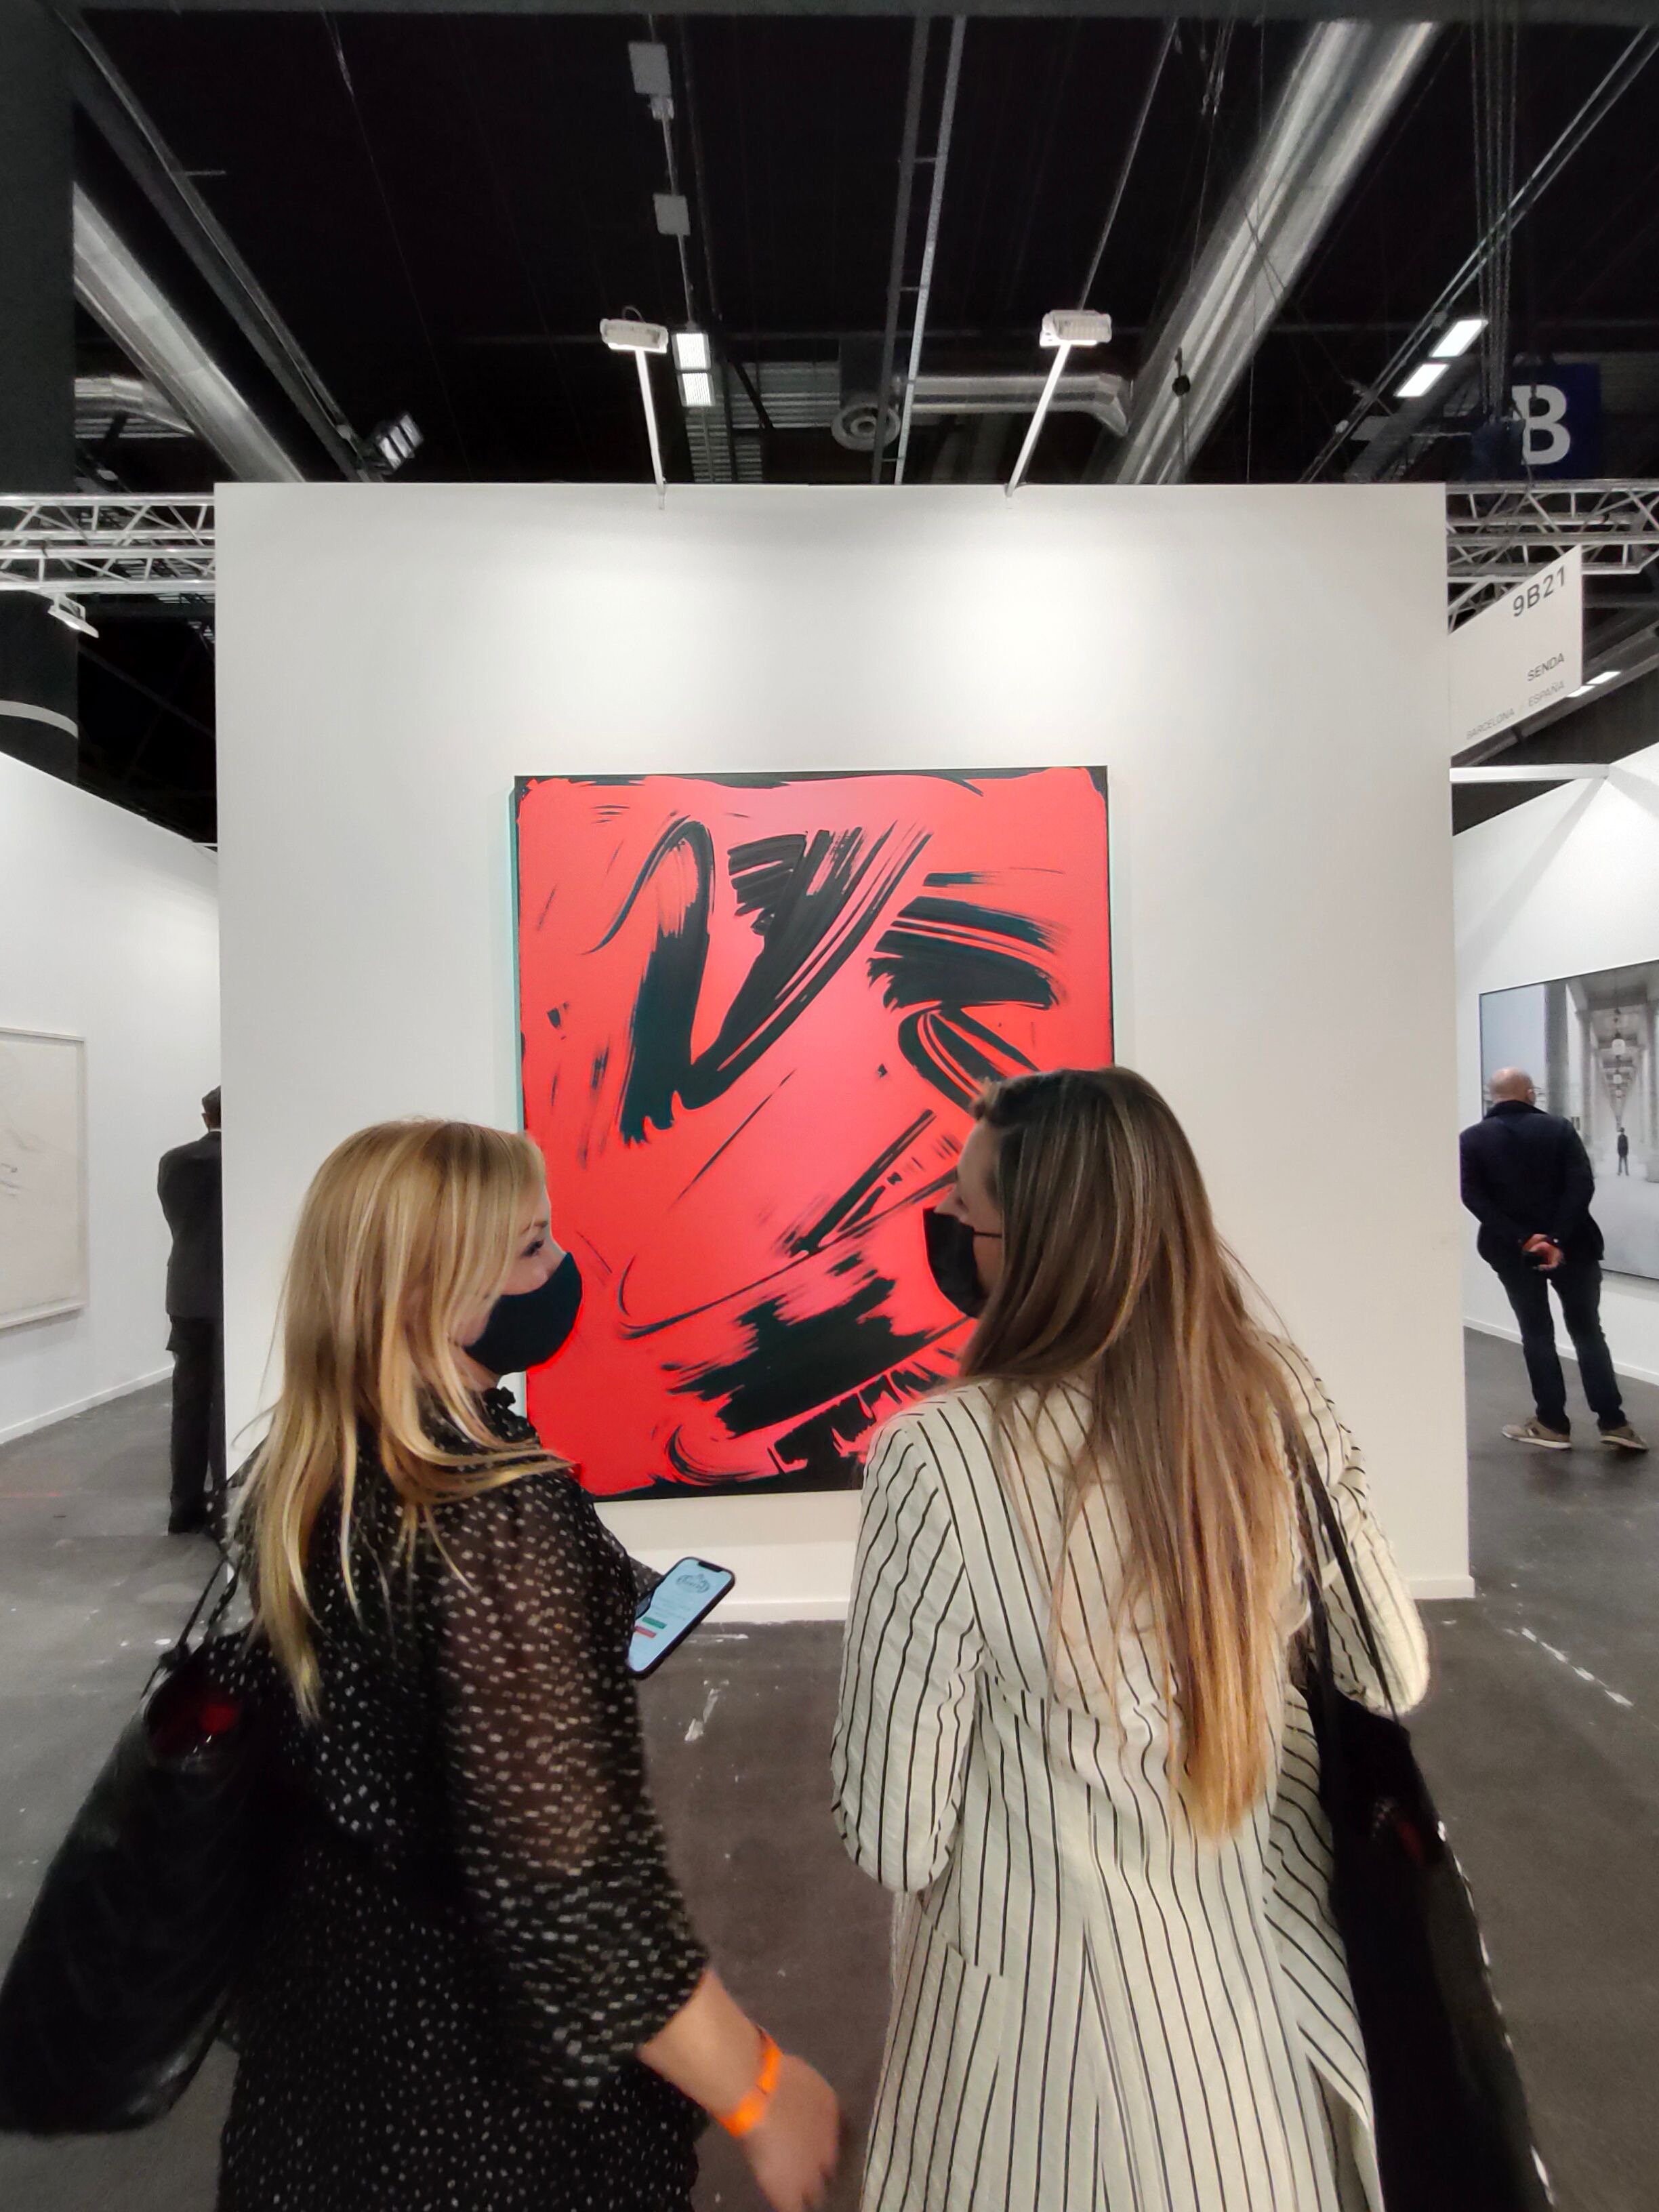 Gabby and Mariella pictured with a piece by Yago Hortal